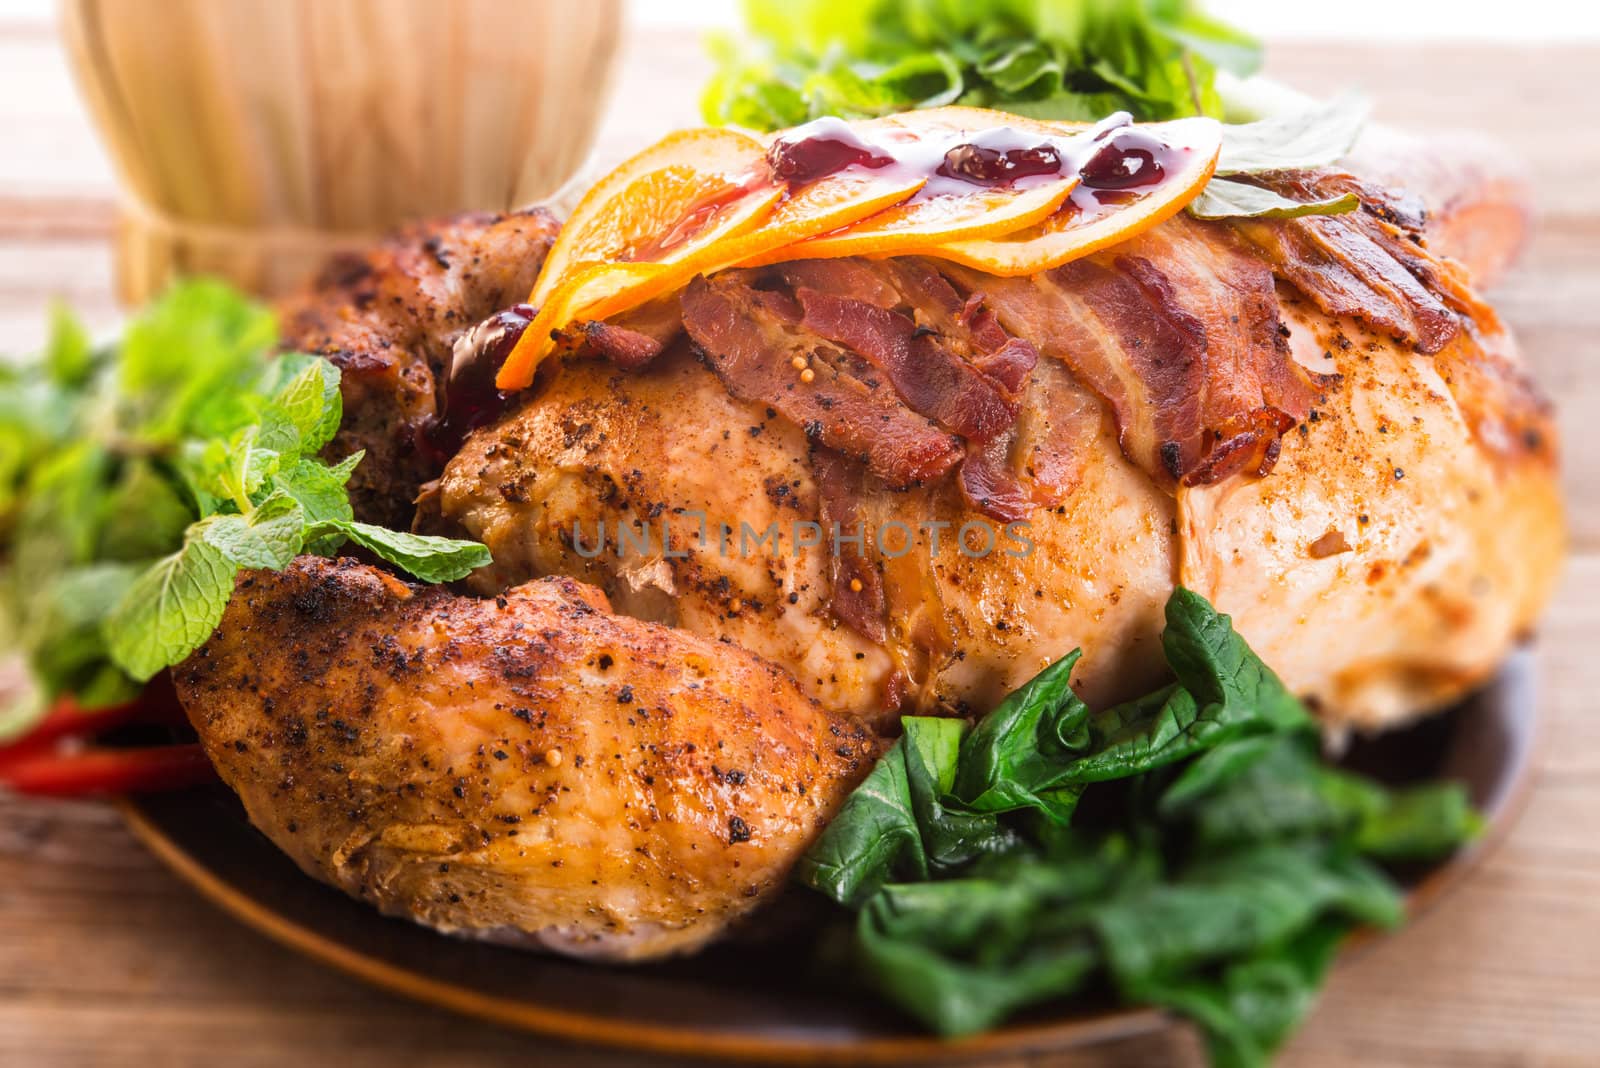 baked turkey with chestnut filling and orange - selective focus by Darius.Dzinnik